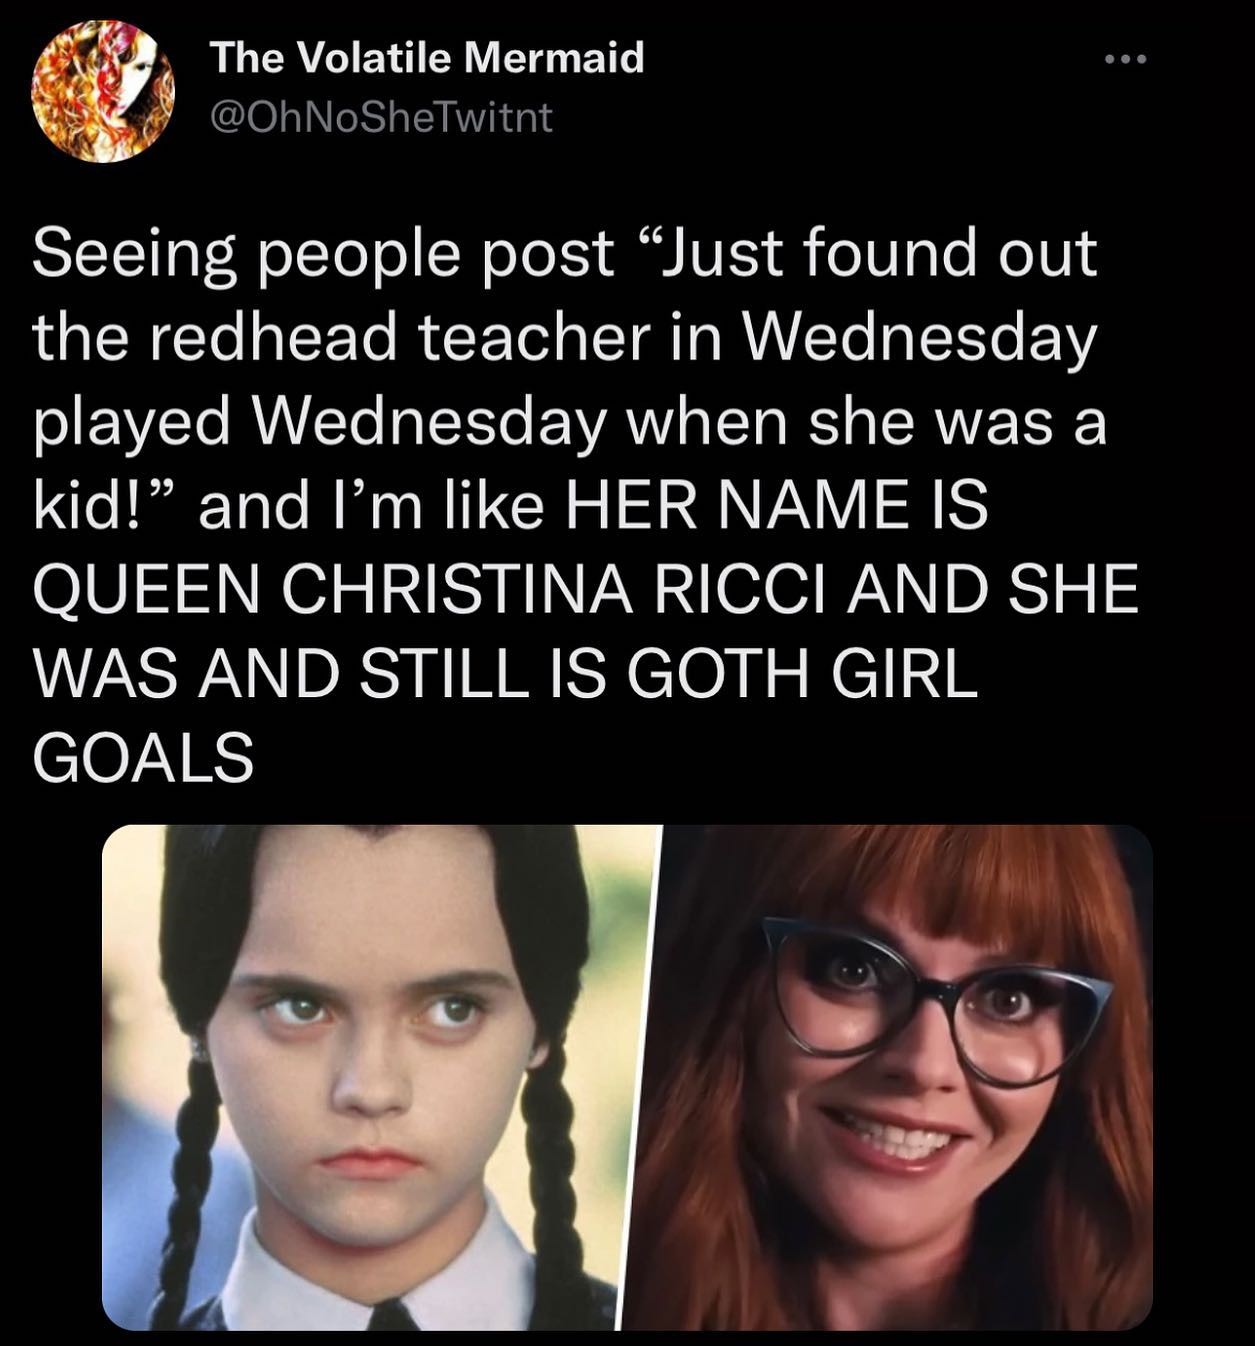 funny tweets - redheaded teacher in wednesday - The Volatile Mermaid Seeing people post "Just found out the redhead teacher in Wednesday played Wednesday when she was a kid!" and I'm Her Name Is Queen Christina Ricci And She Was And Still Is Goth Girl Goa